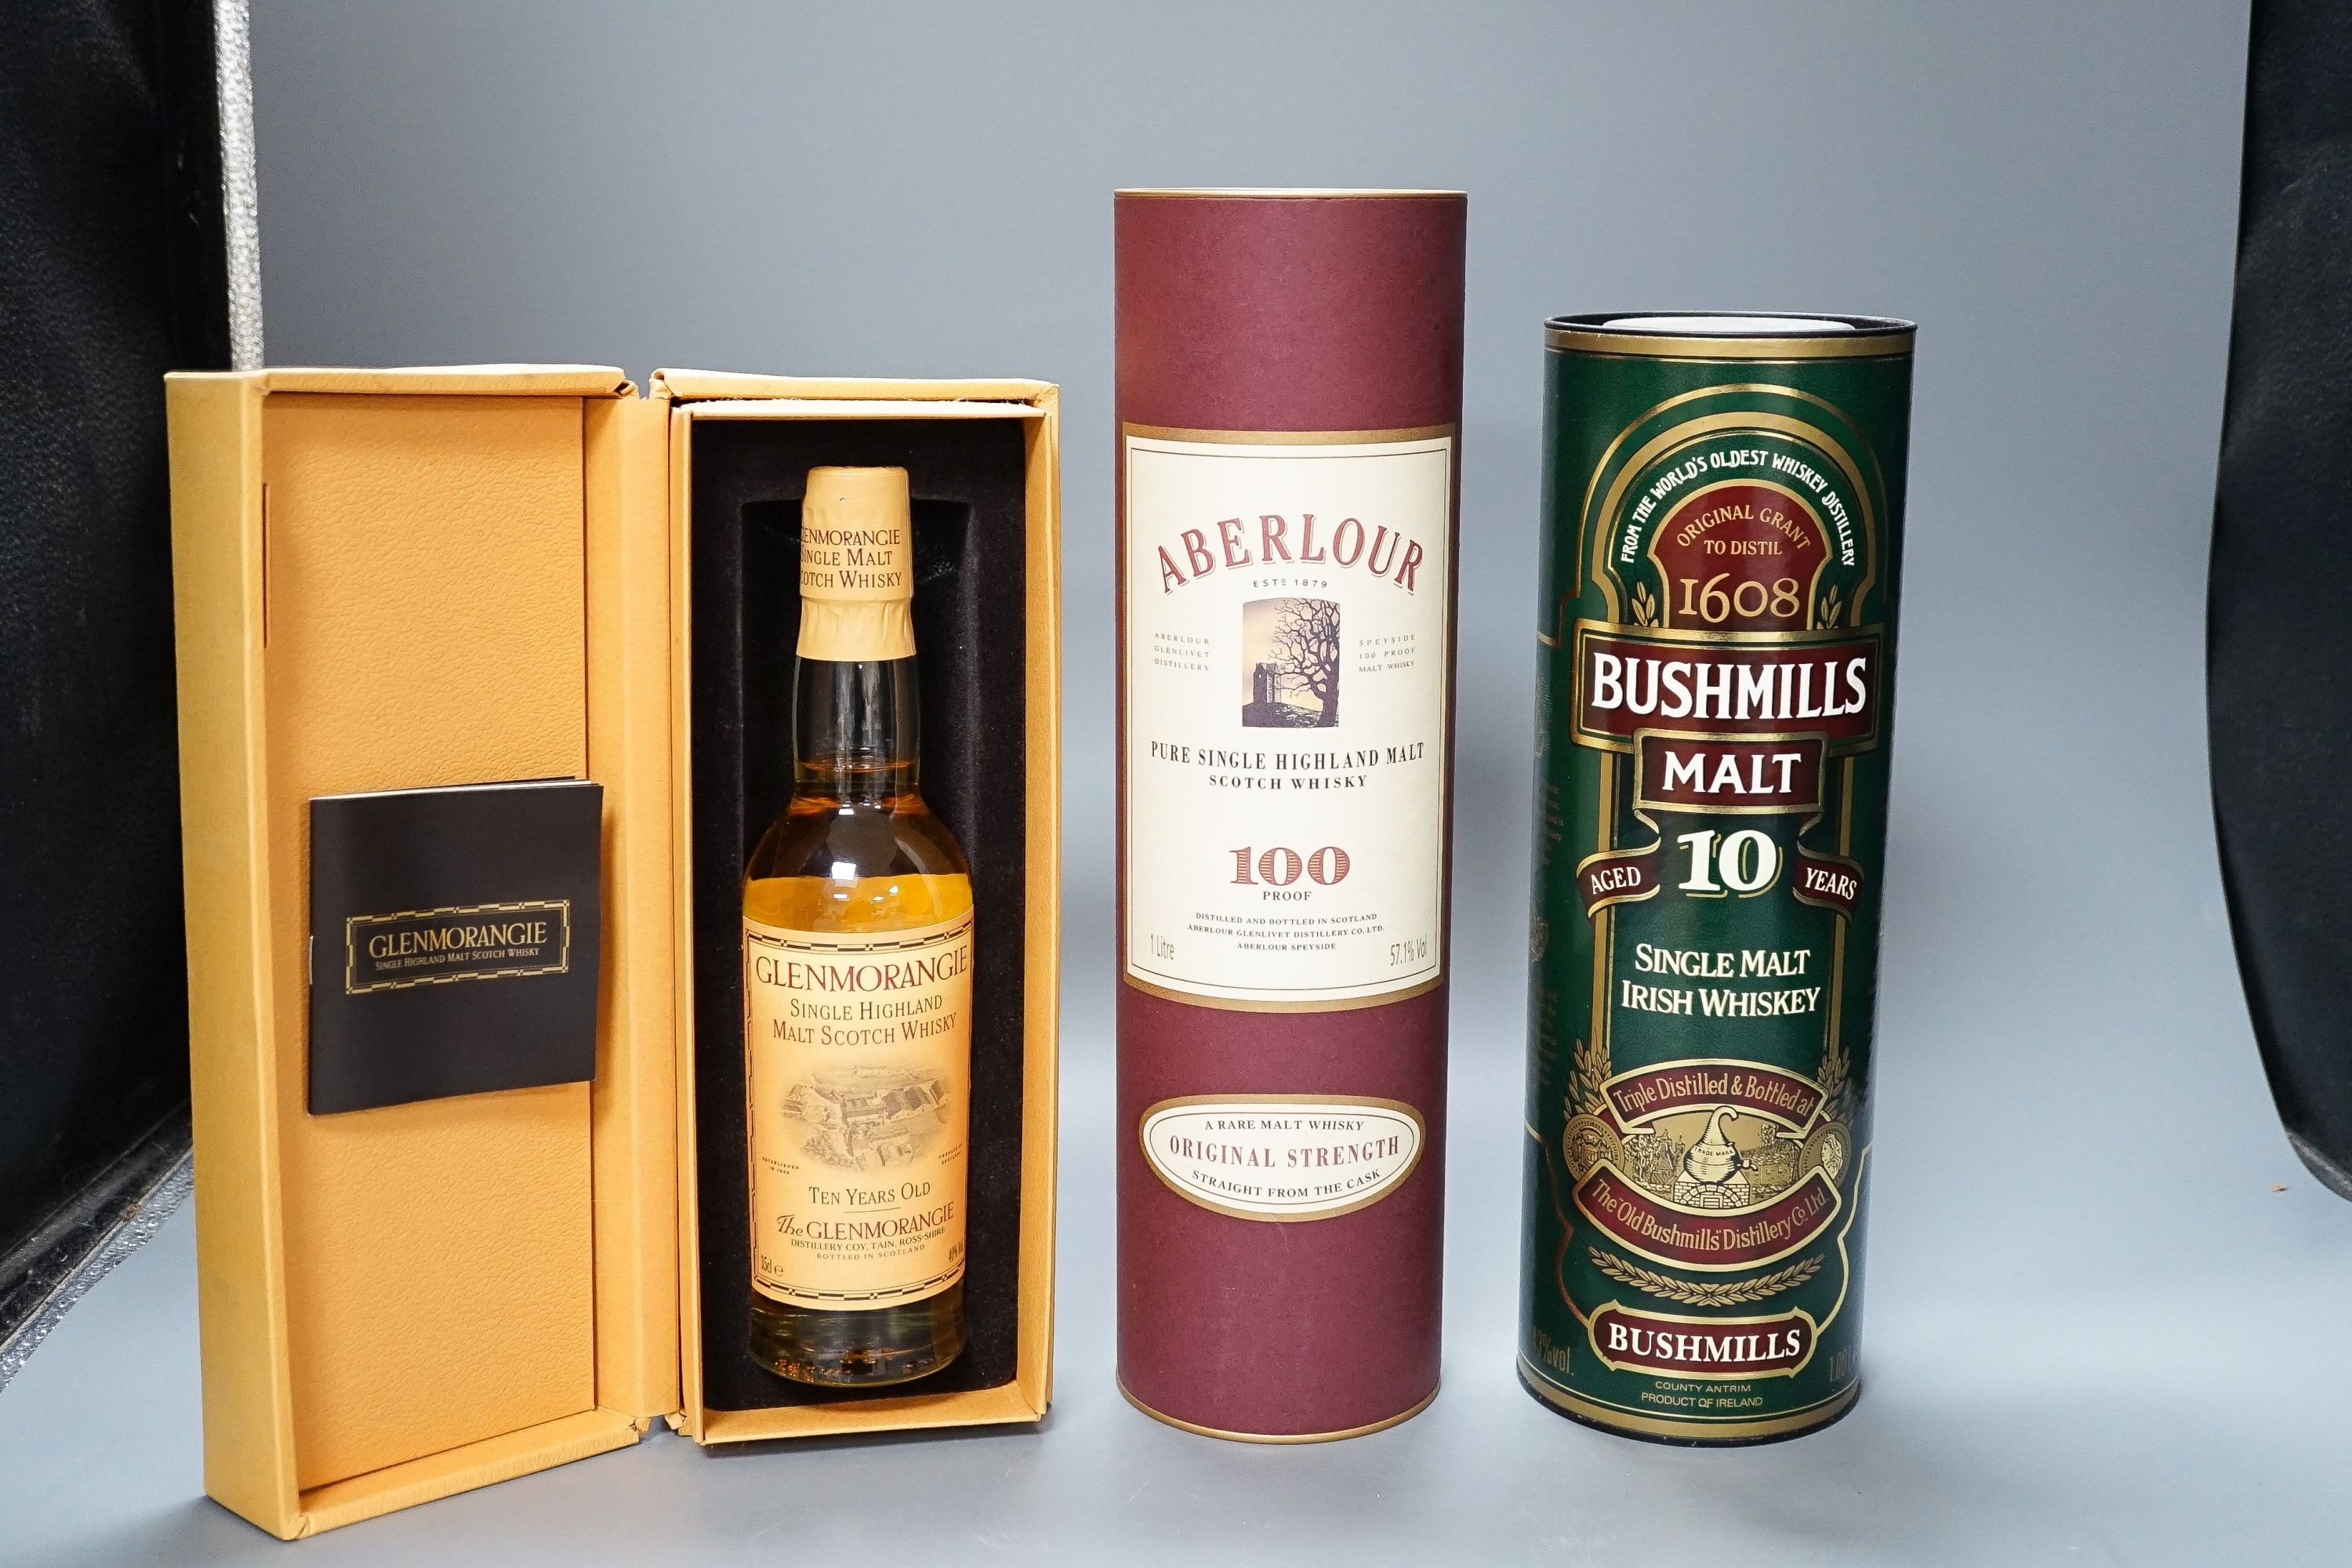 1 litre of 100 proof Abelour Scotch whisky, 1 litre of 10 year Bushmills Irish whiskey and a 35cl 10 year Glenmorangie